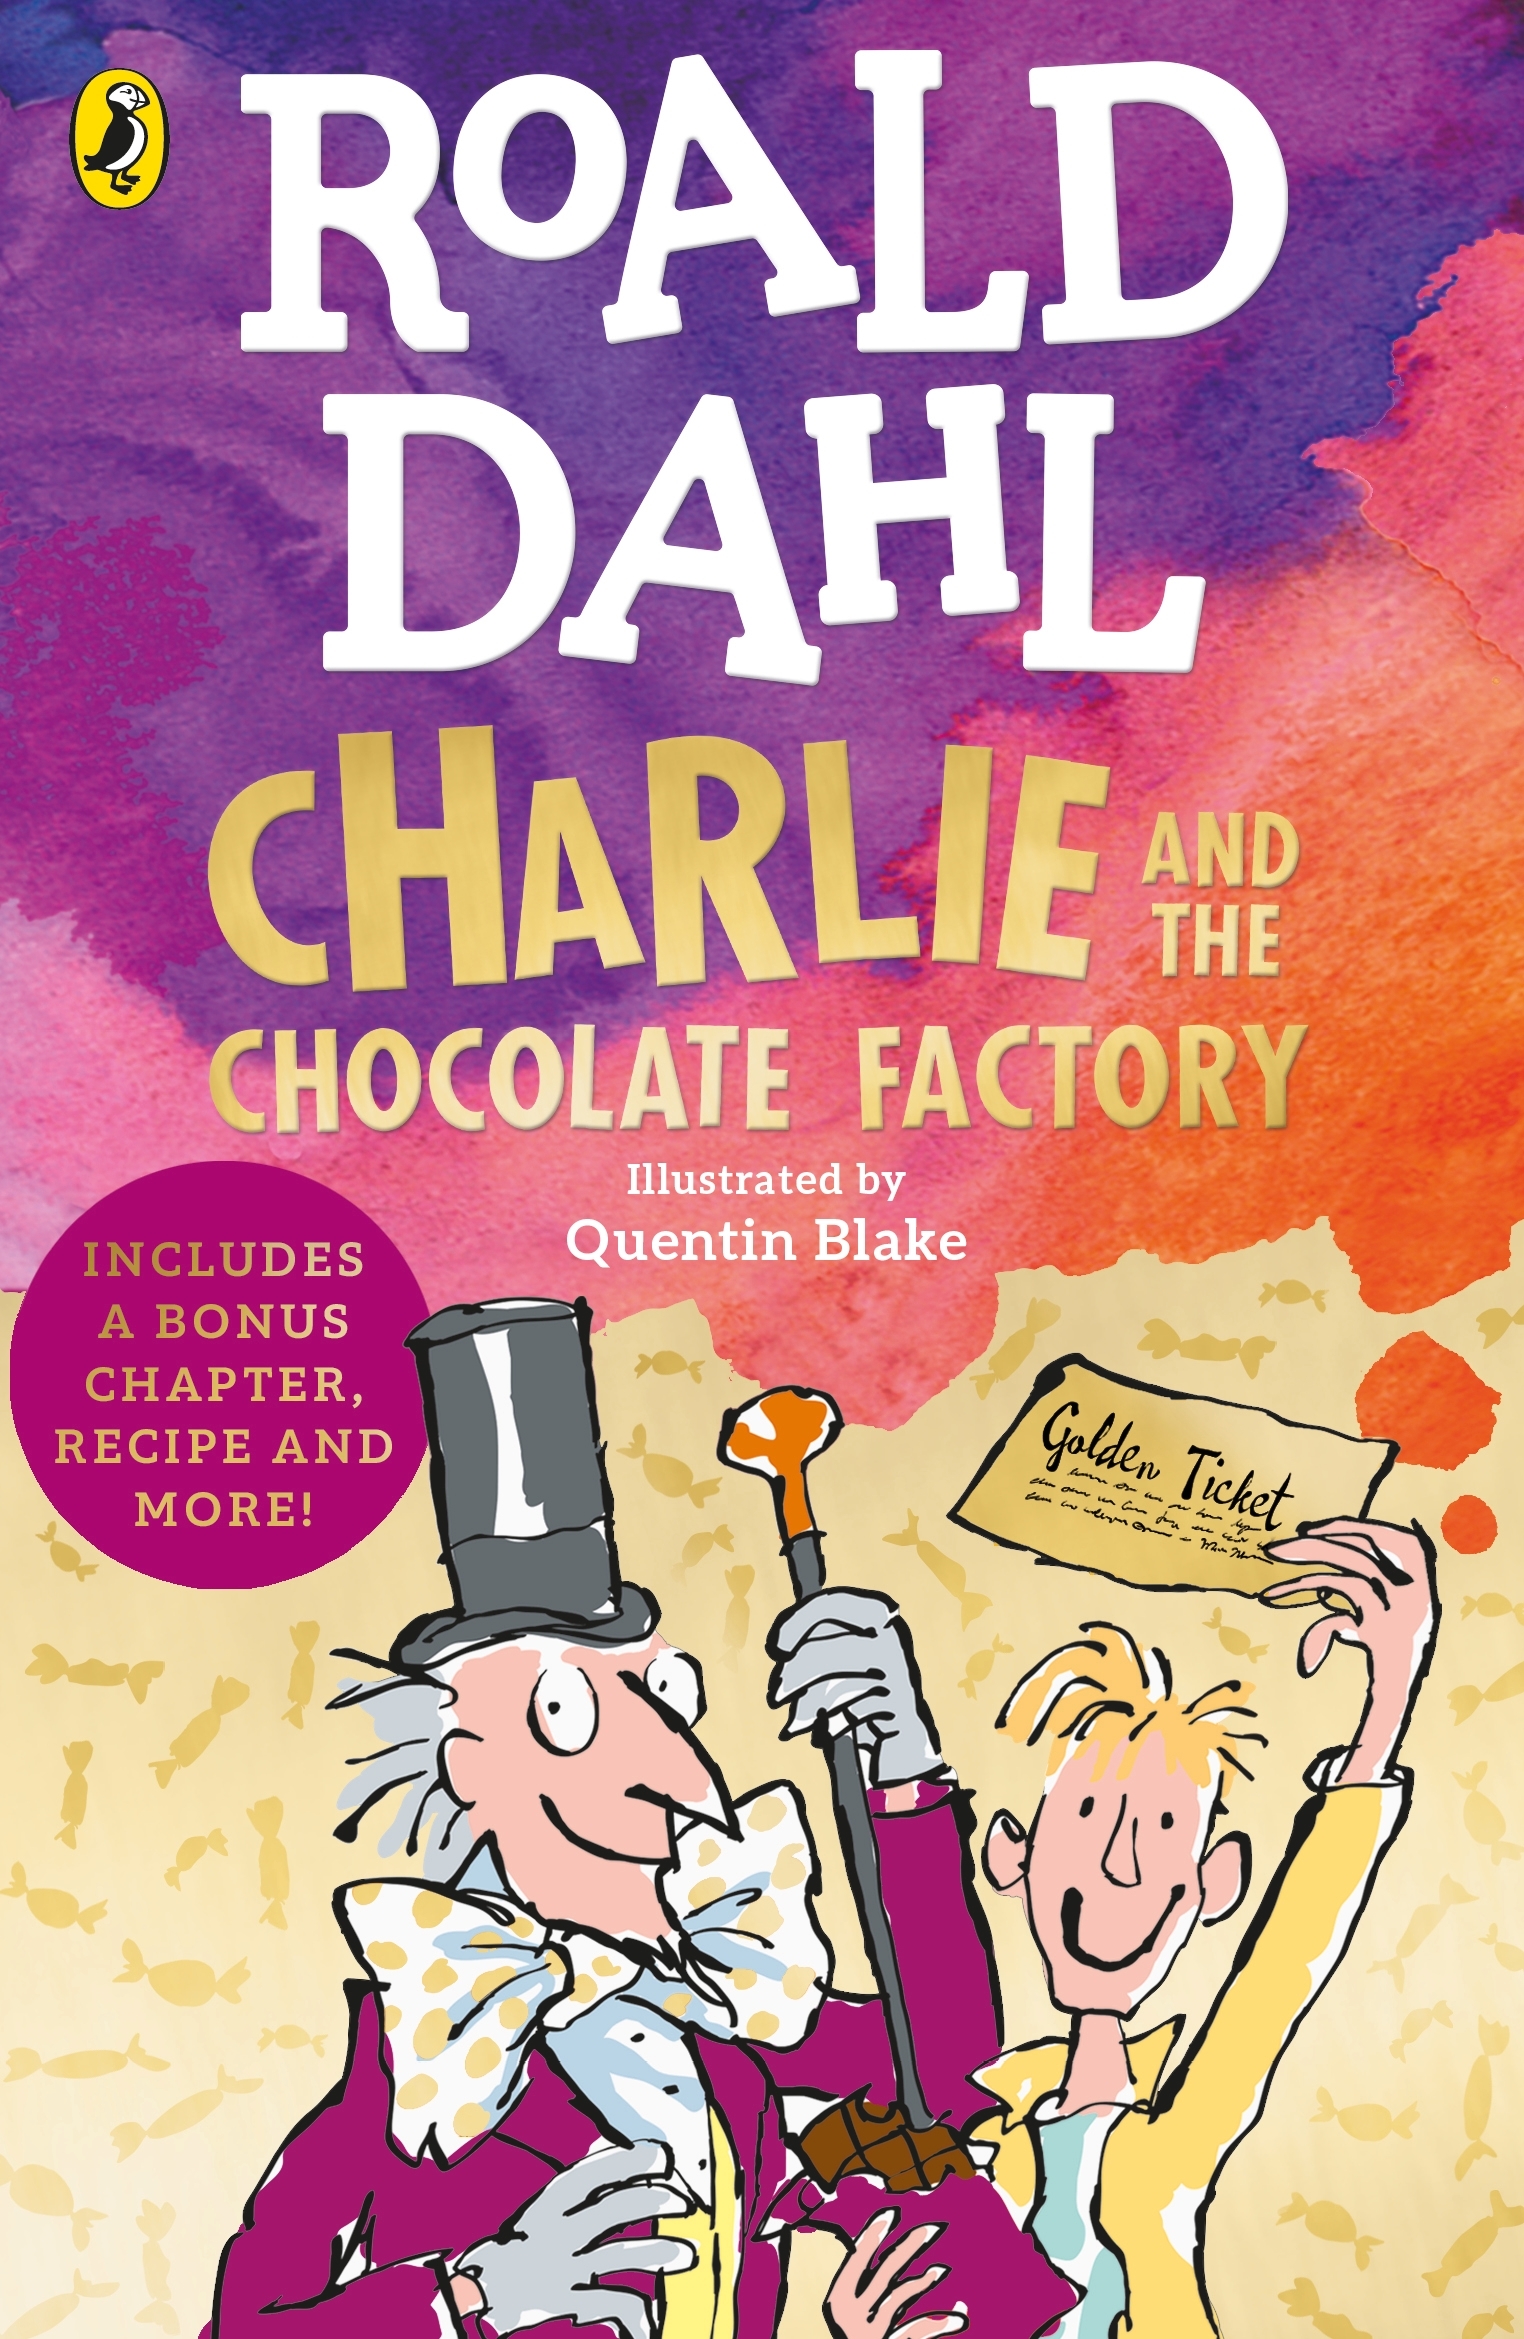 Charlie and the Chocolate Factory by Roald Dahl - Penguin Books Australia